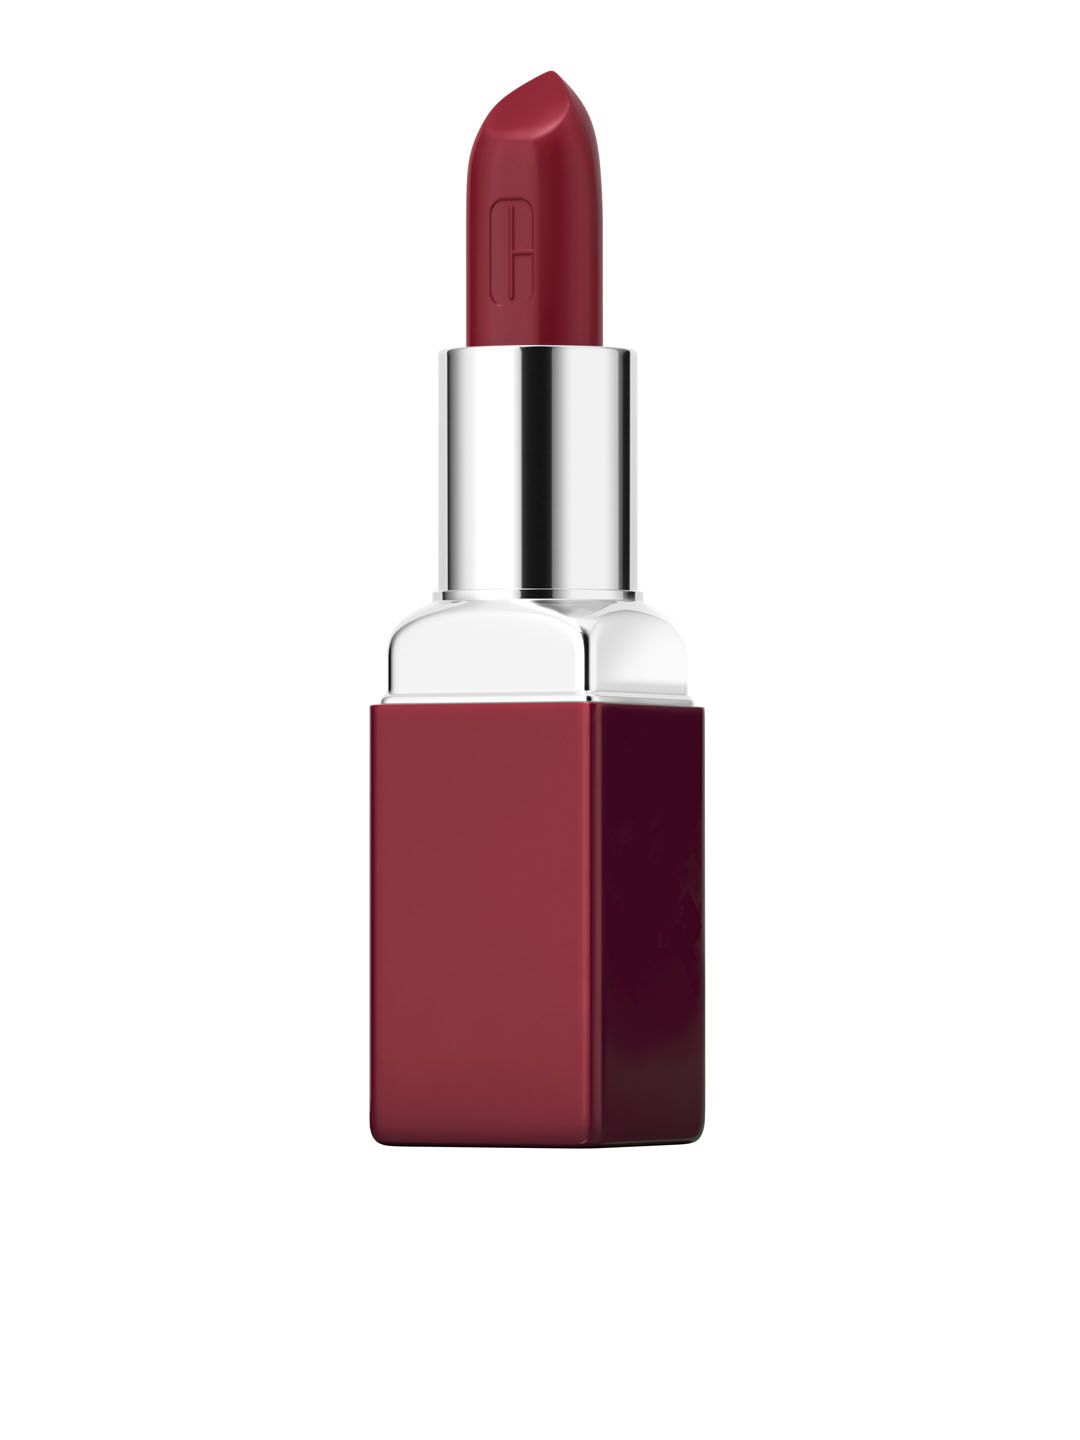 Clinique Pop Reds Lipstick - Red-Y To Party 03 Price in India